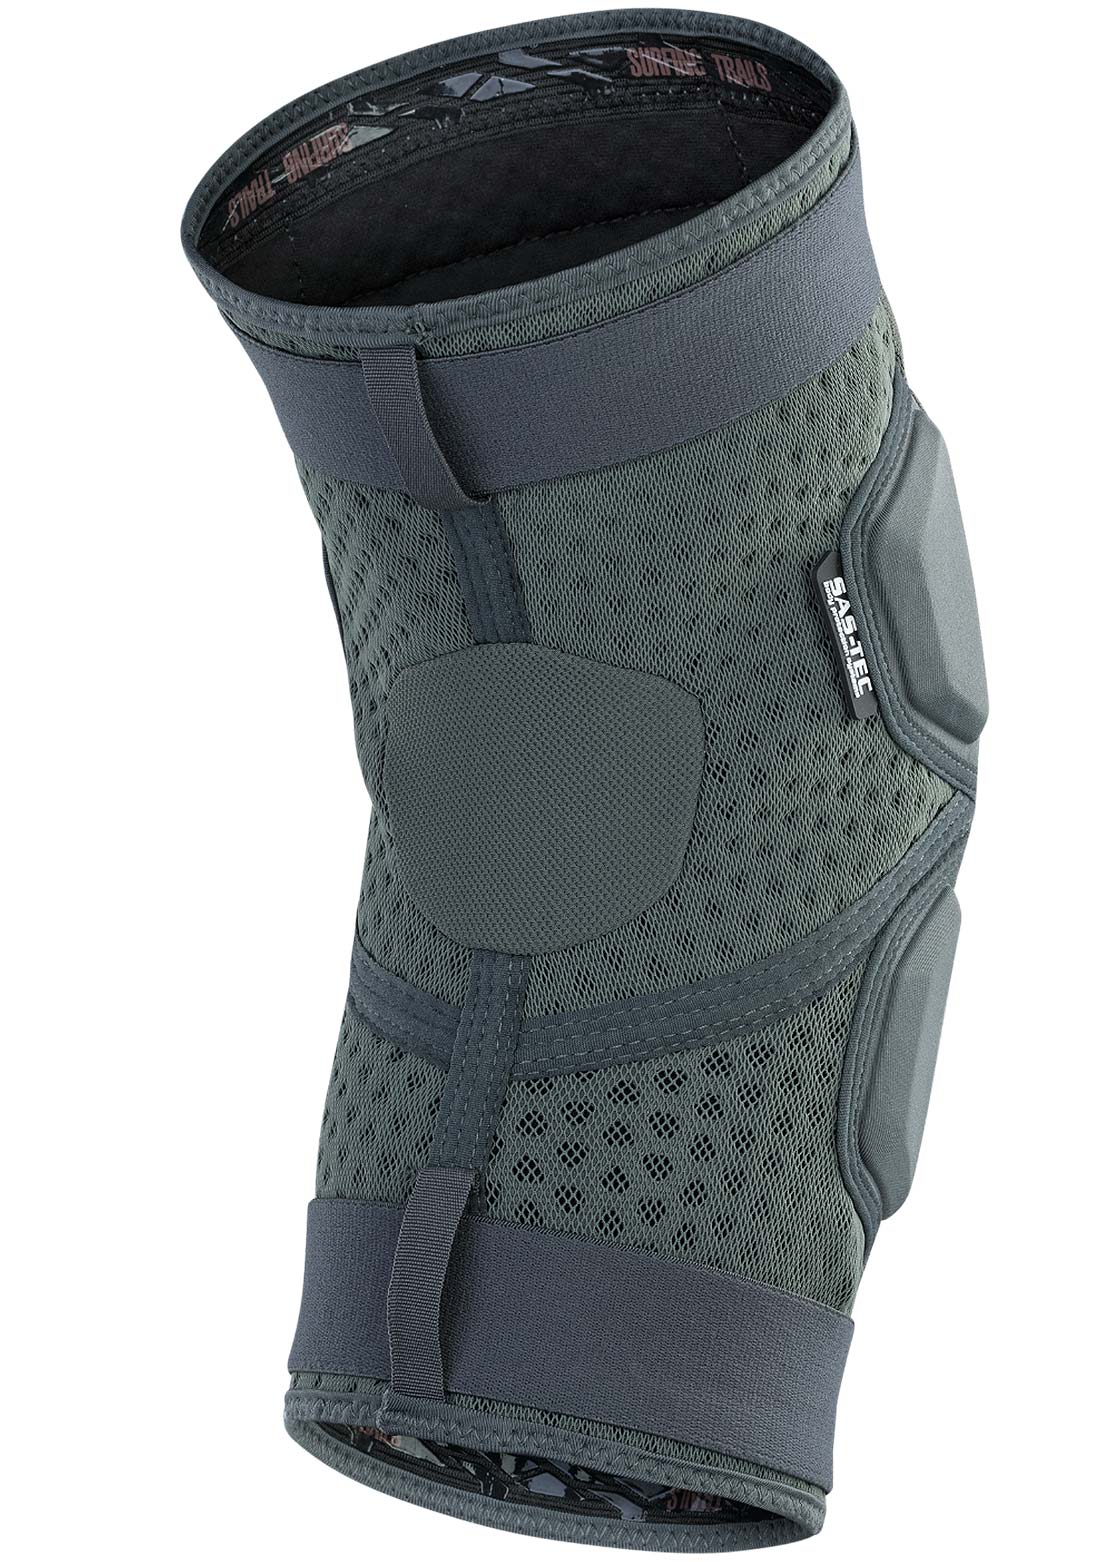 ION Unisex K-Pact Knee Pads Grey